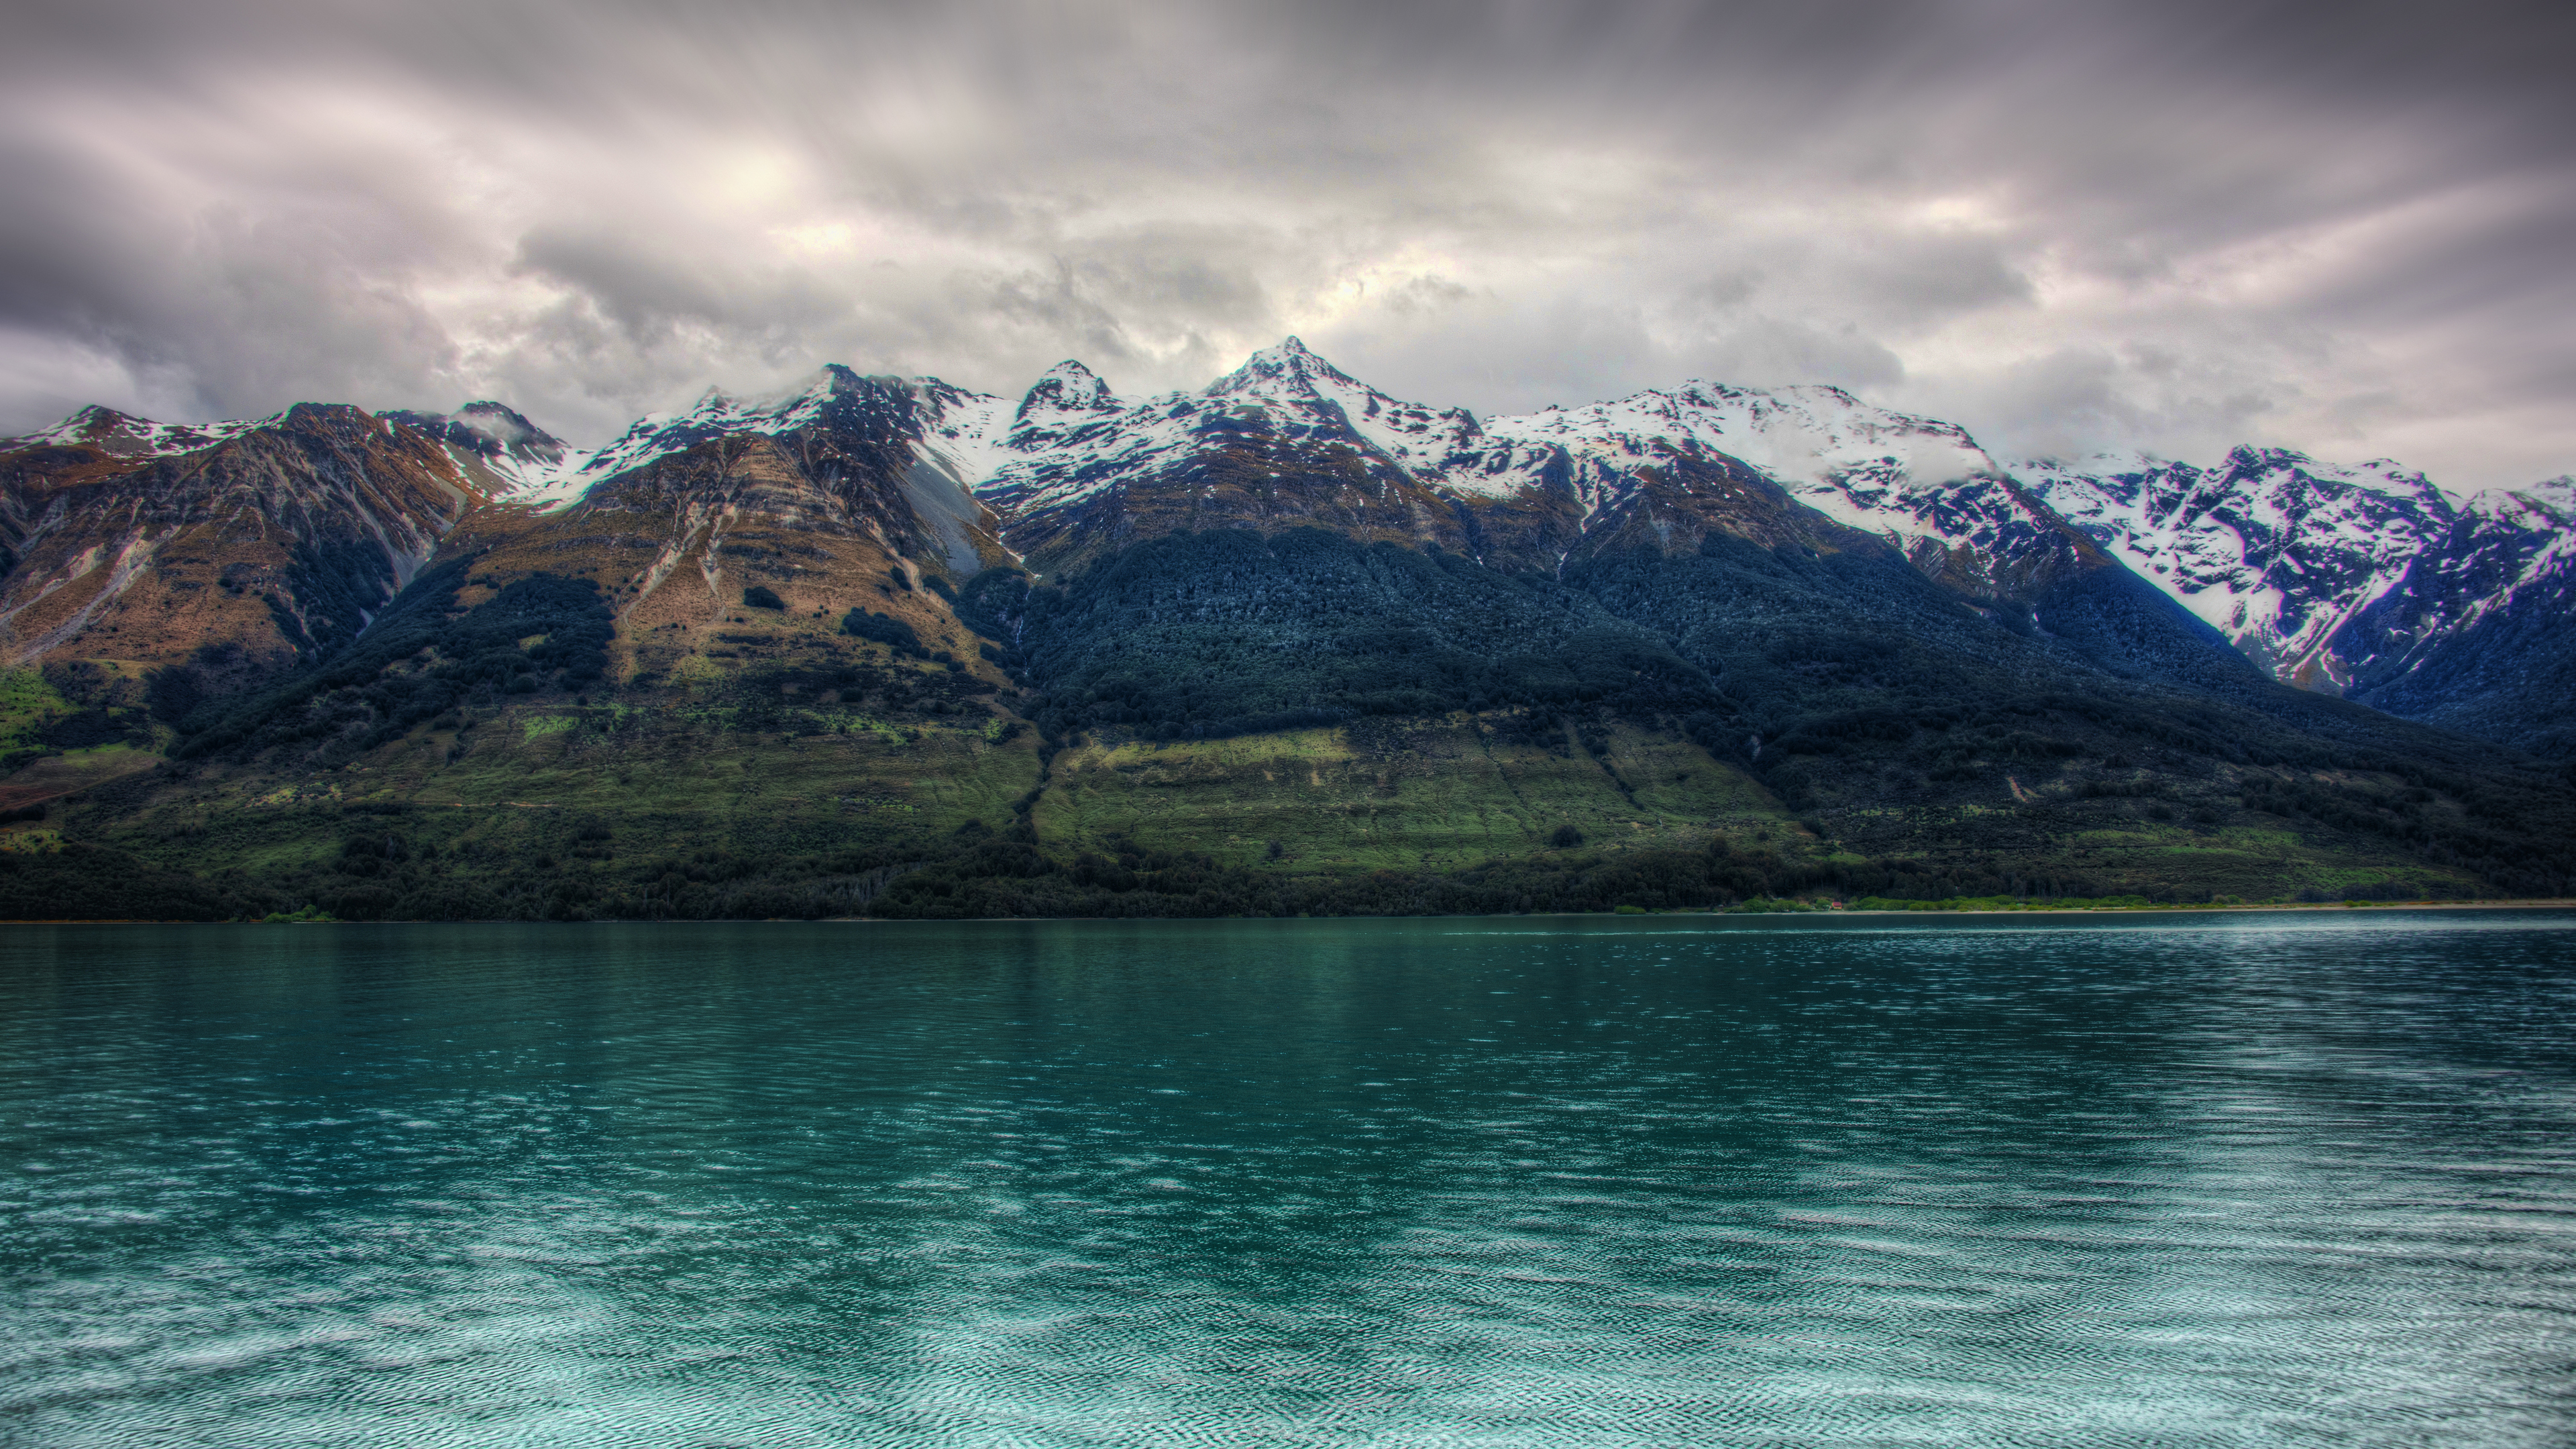 Trey Ratcliff Photography Landscape New Zealand Nature Water Mountains Snow Clouds 3840x2160